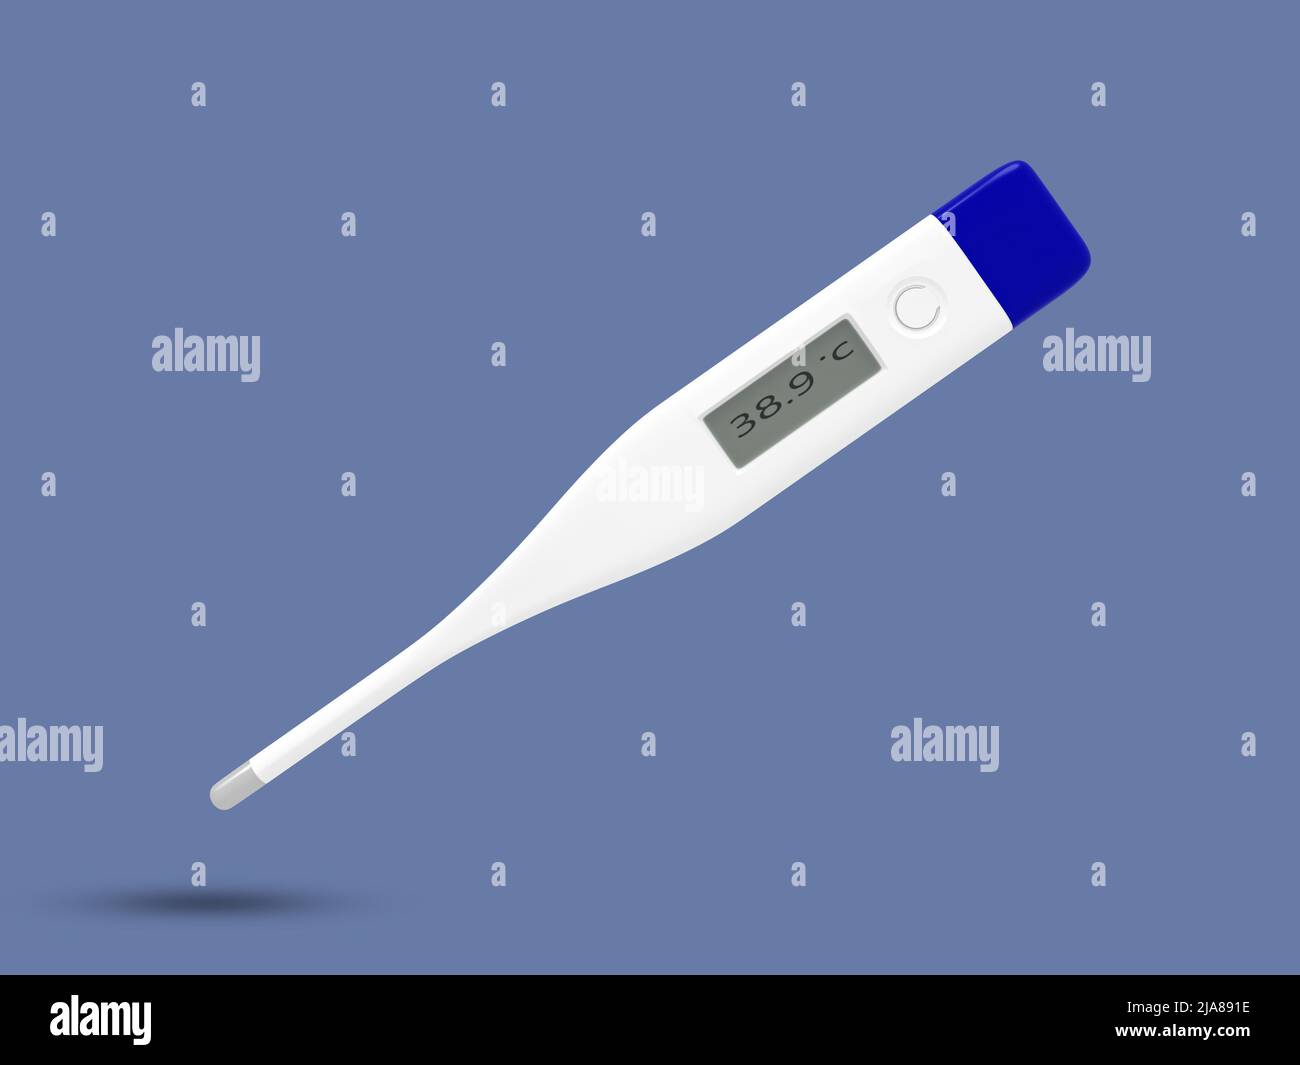 Two thermometers for measuring air temperature - Stock Image - E180/0363 -  Science Photo Library